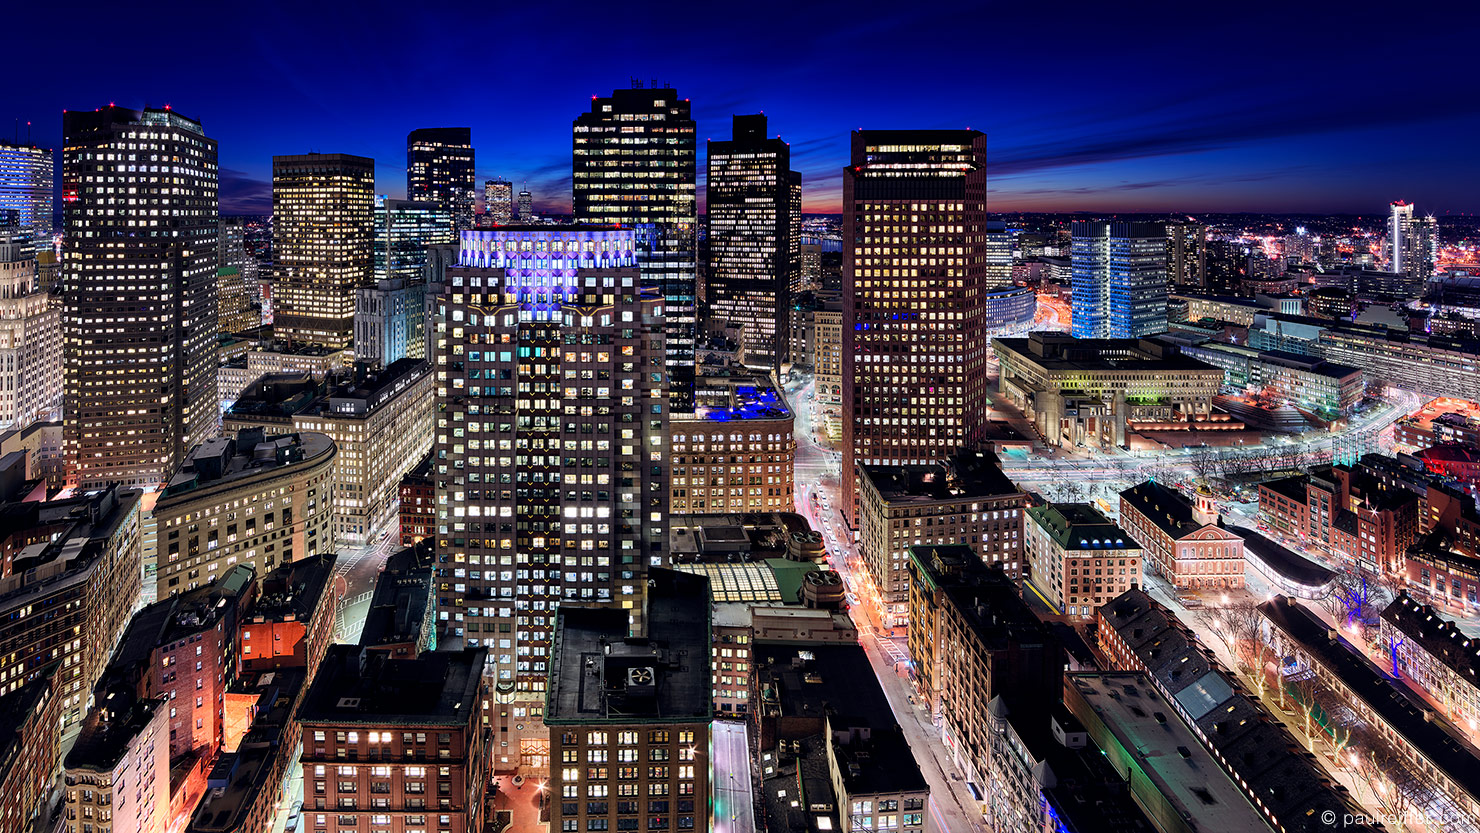 Cityscape West Central Boston Night City Lights Rooftop Custom House Paul Reiffer Blue Hour Photographer Phase One Trichromatic 100MP Panoramic Pano Detail